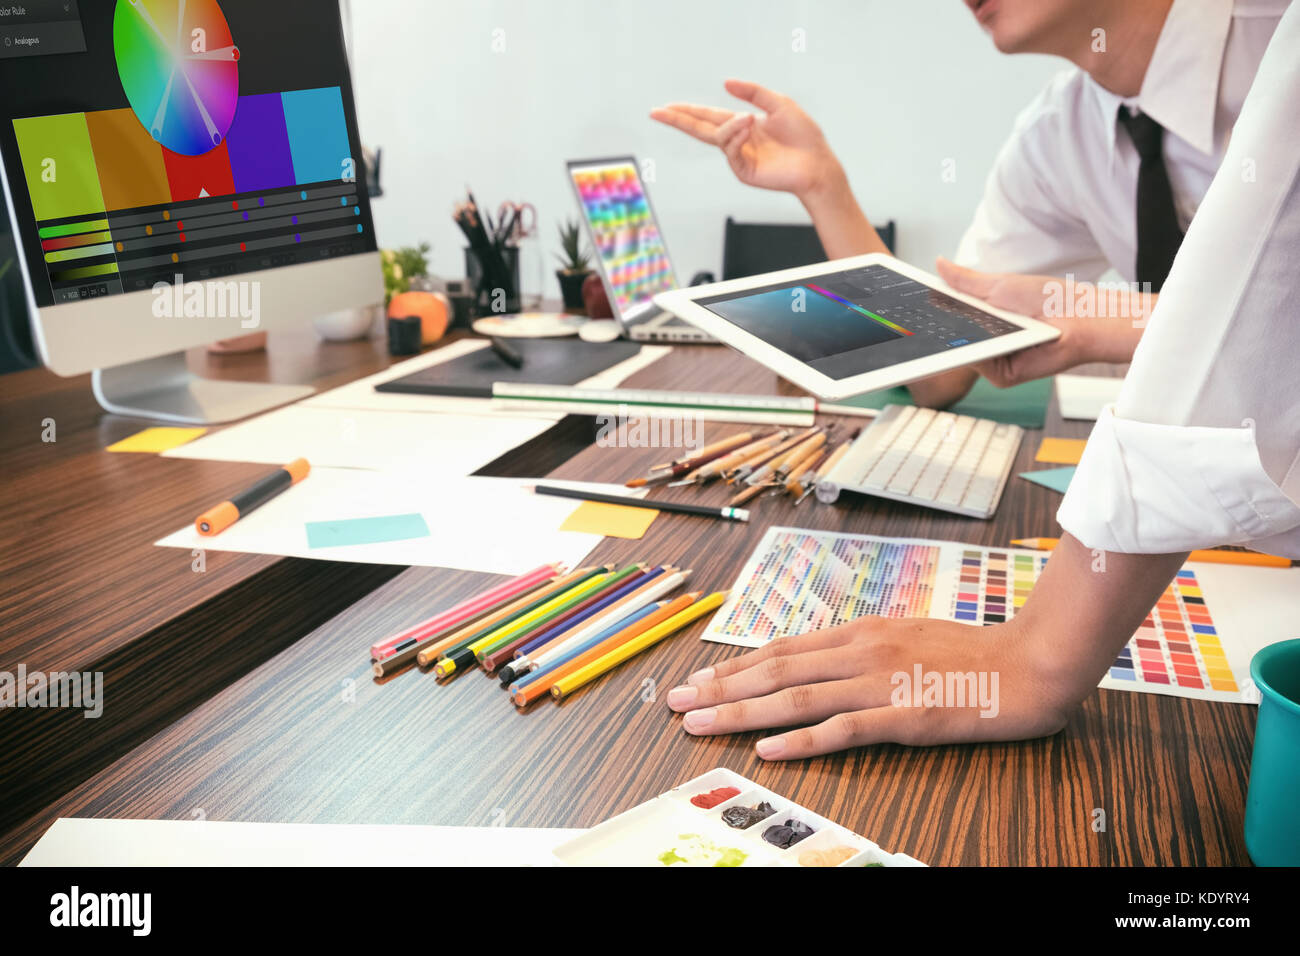 Artist creative meeting or brainstorming, graphic design concept. Stock Photo